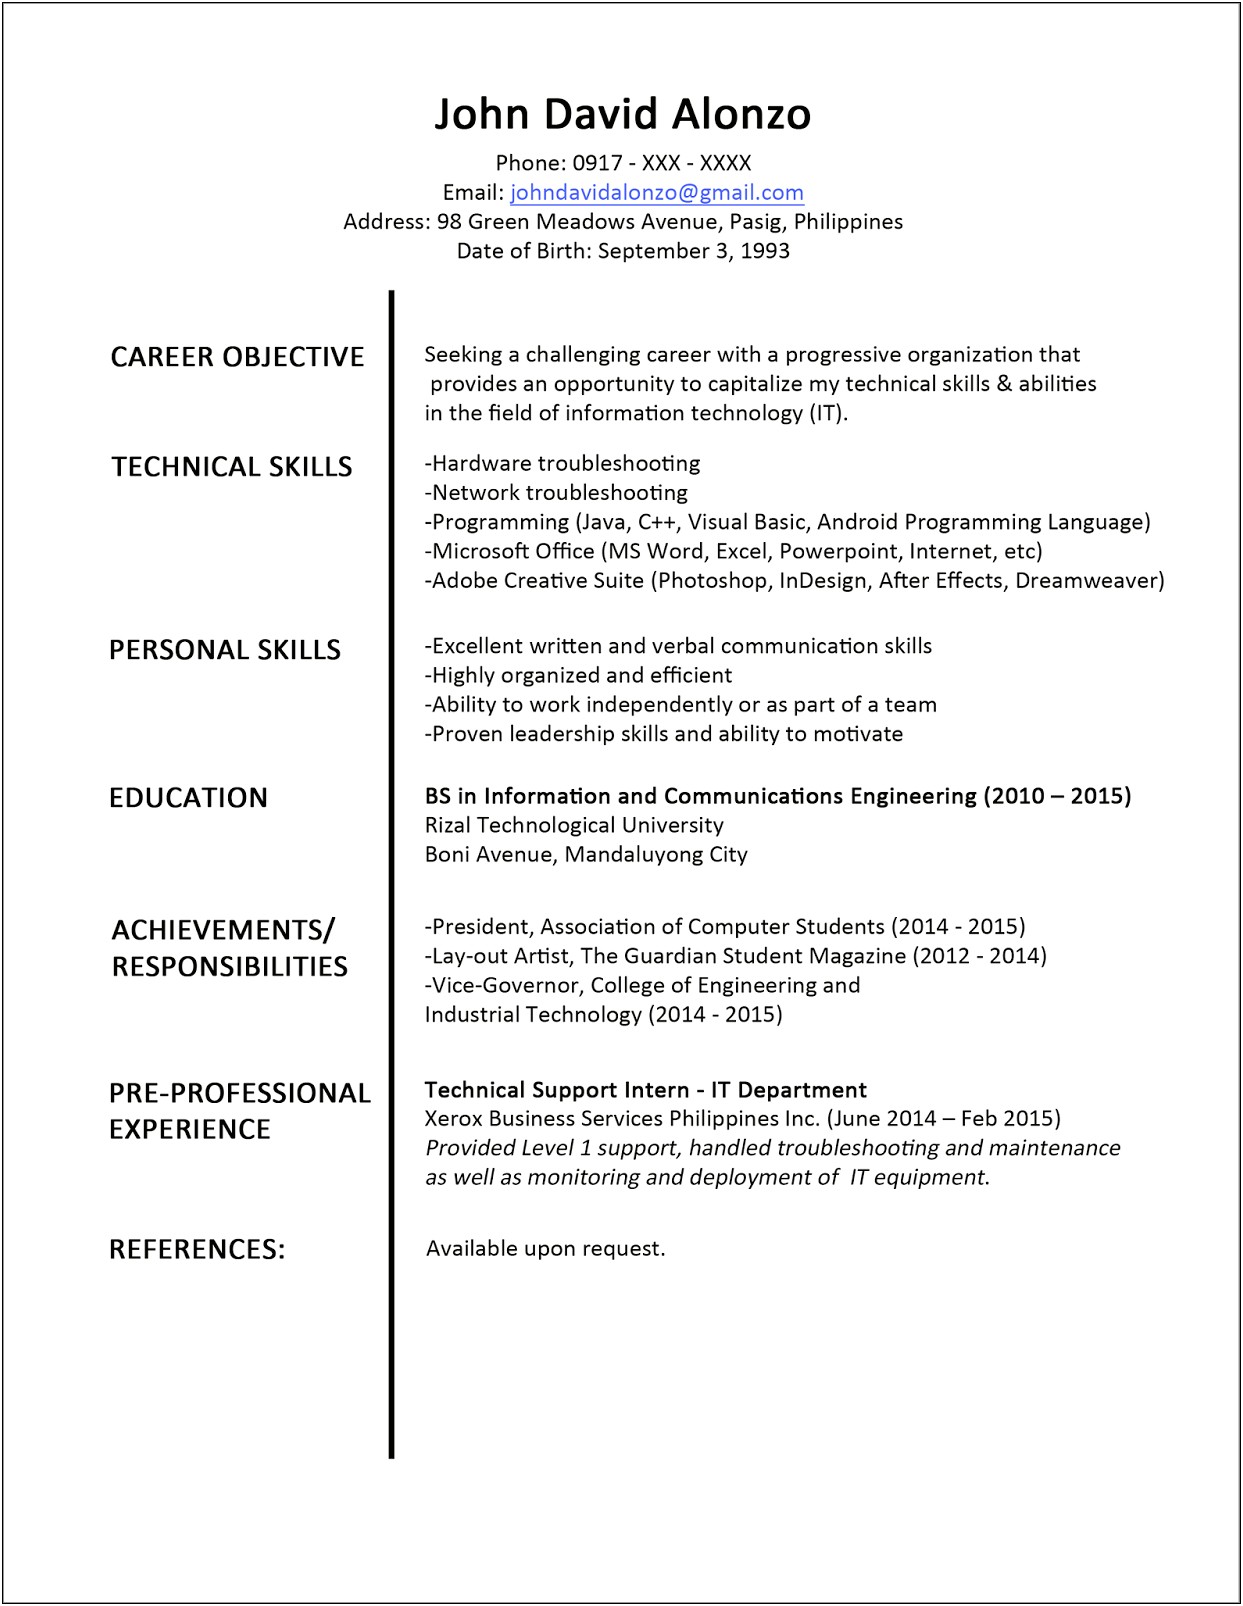 Sample Resume With Microsoft Office Experience